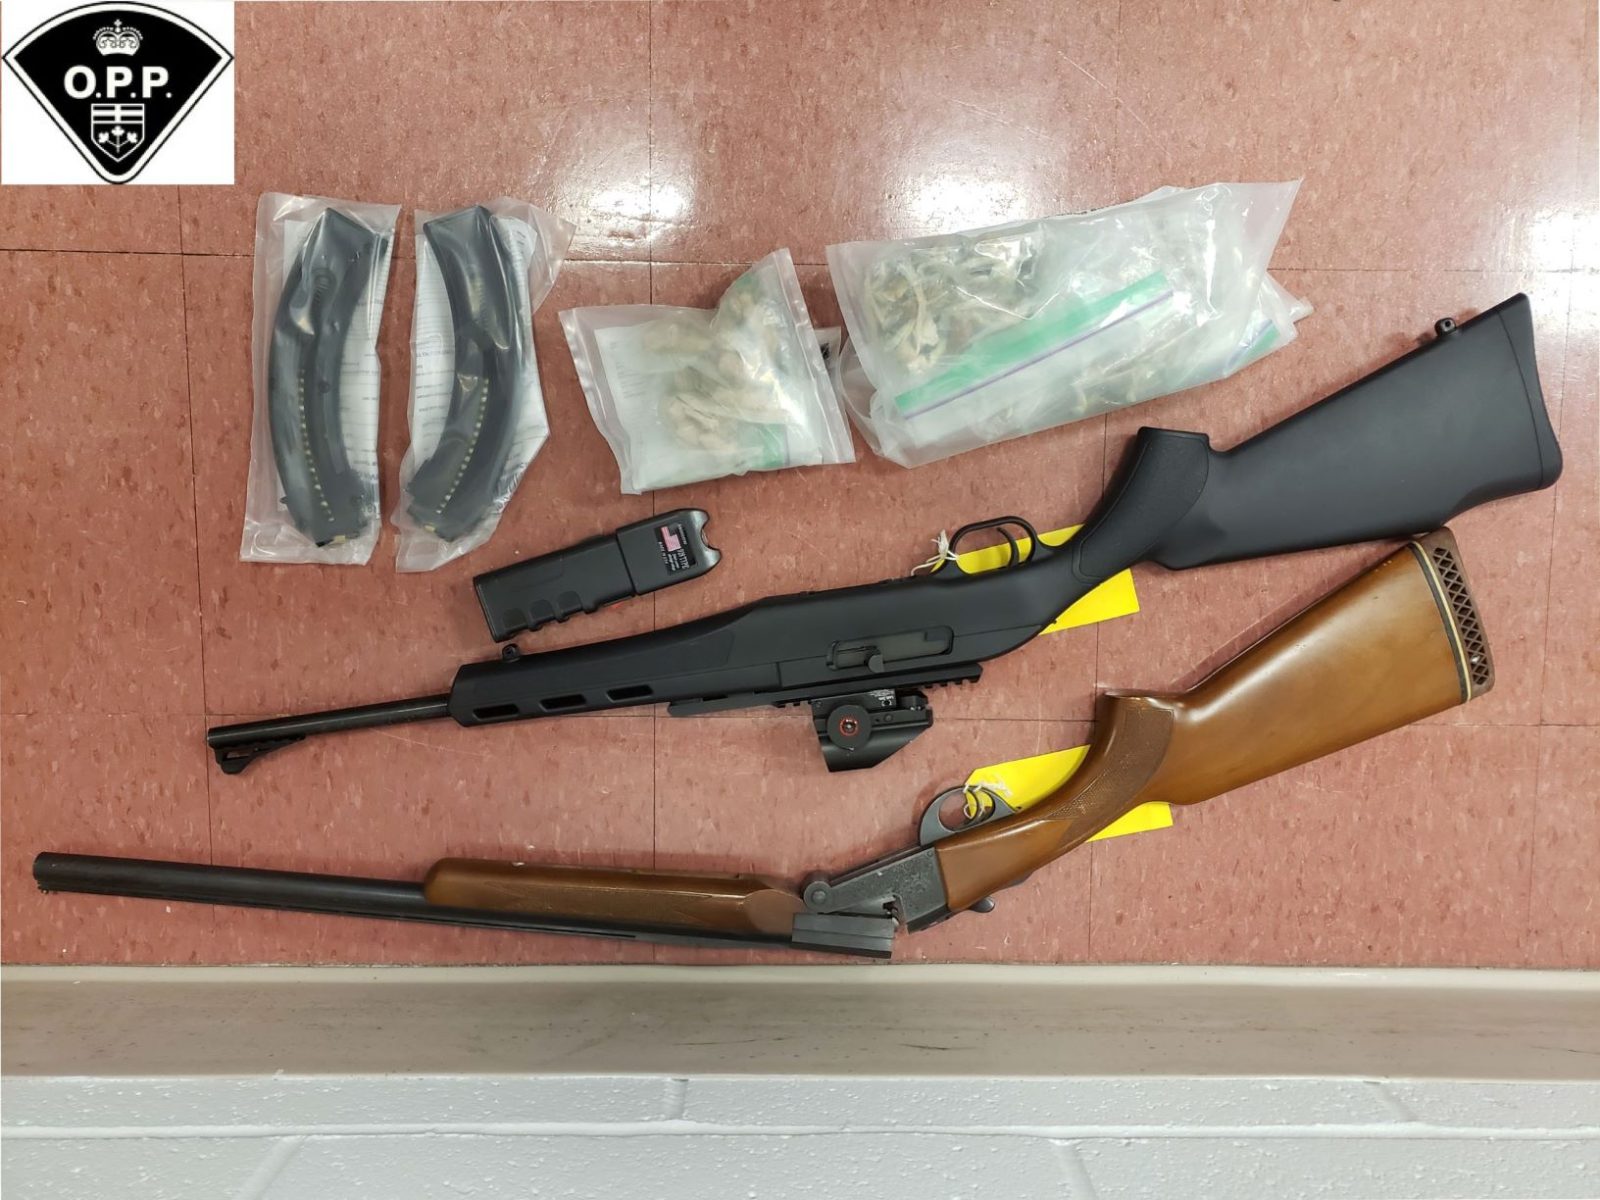 Police seize weapons and drugs